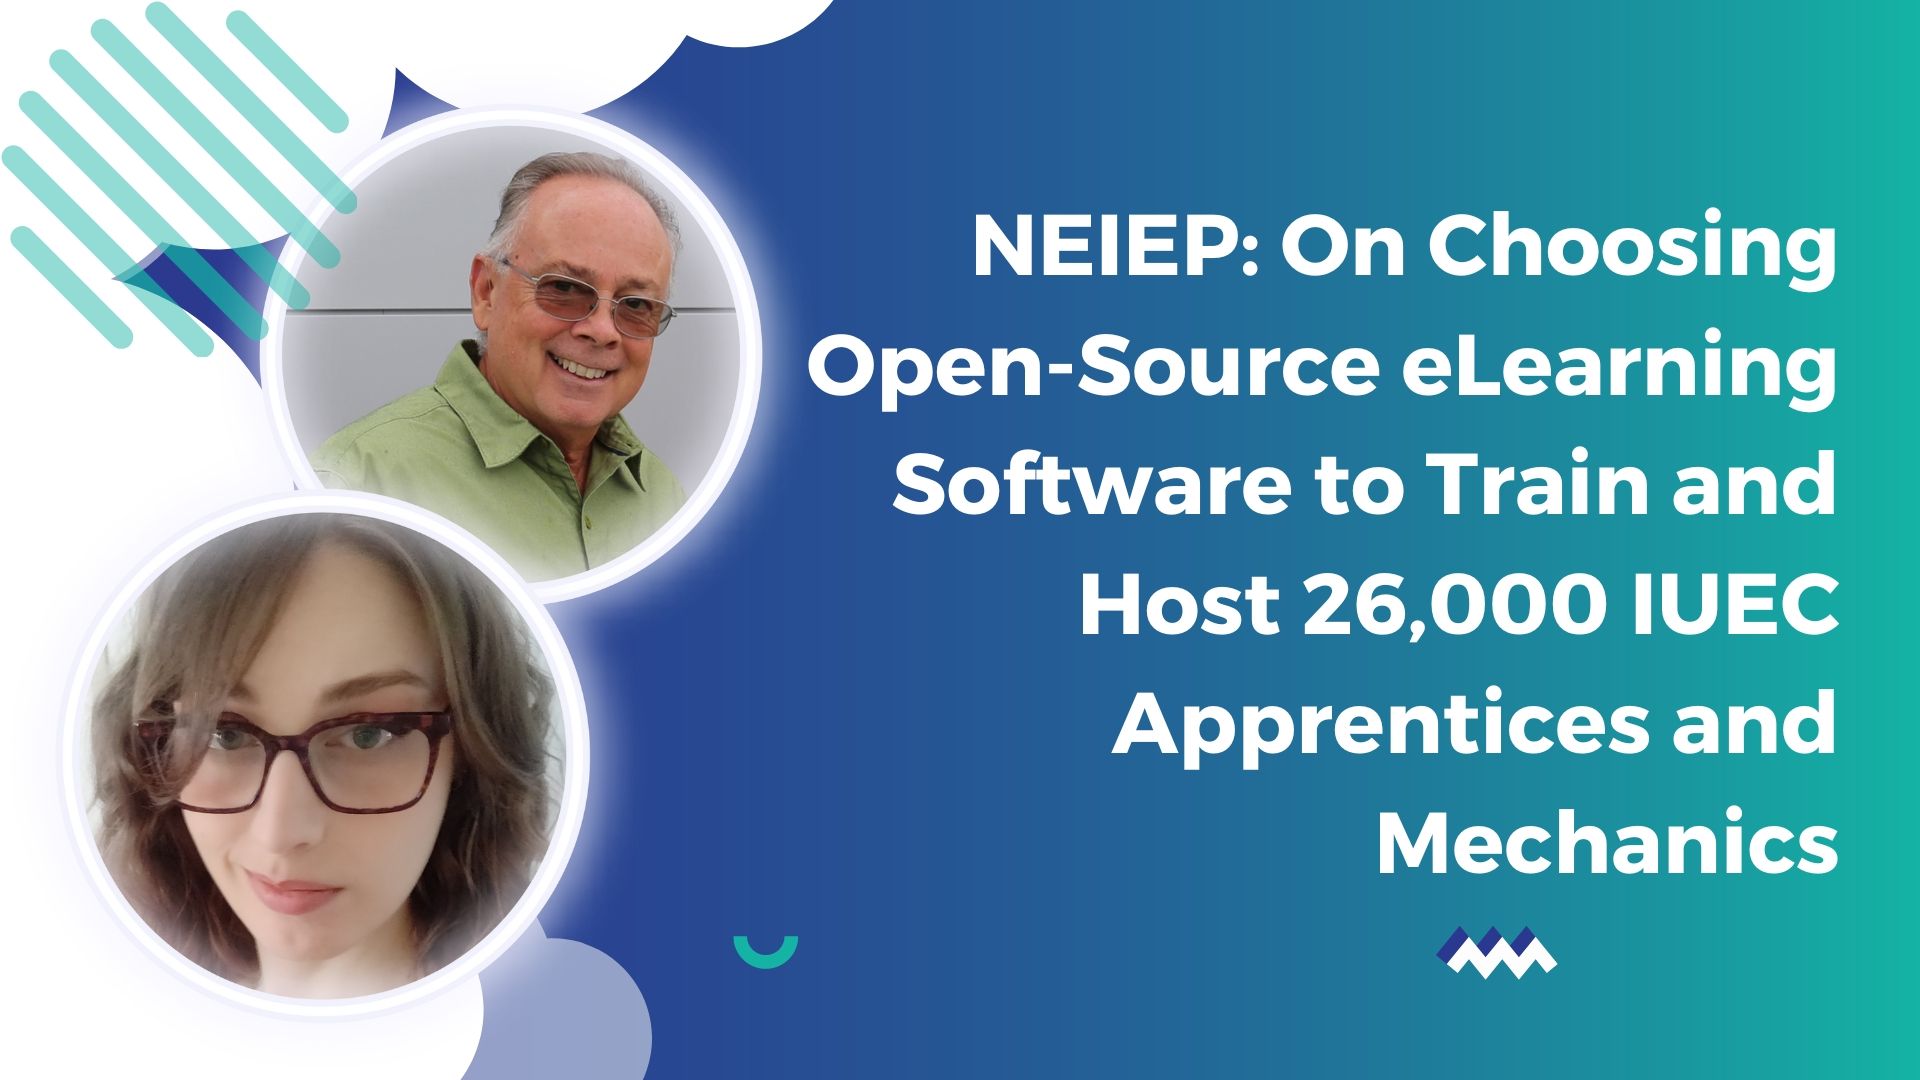 NEIEP: On Choosing Open-Source eLearning Software to Train and Host 26,000 IUEC Apprentices and Mechanics